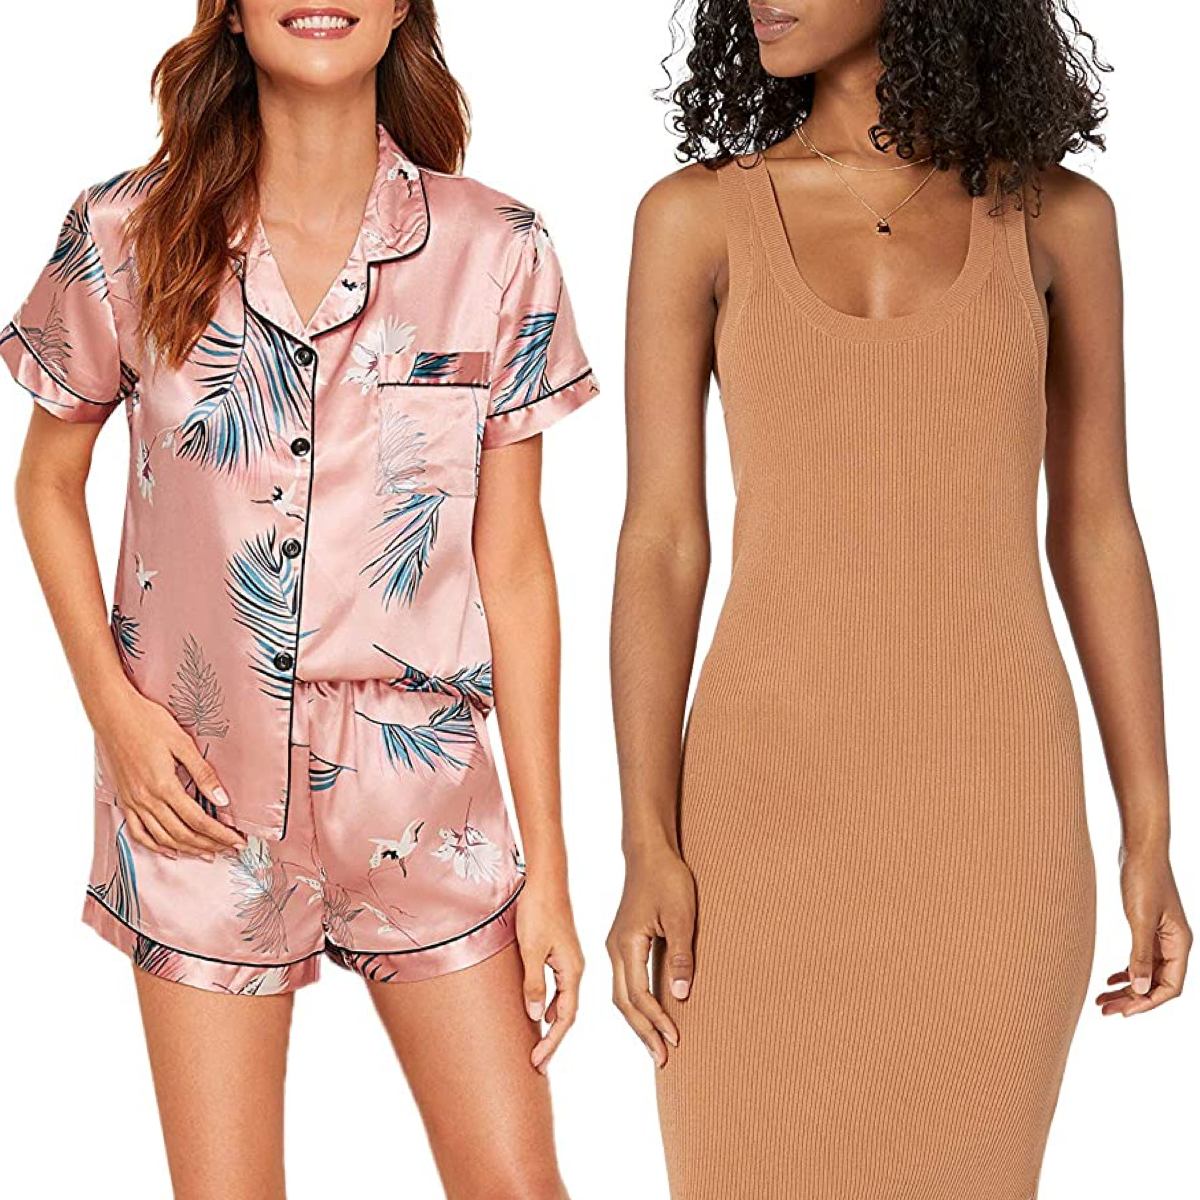 Women Casual Heart Print V,6 Dollar Items,Dresses on Clearance,My Orders  Placed Recently by me,1.00 Dollar Items,Special Deals,Upcoming Deals of The  Day Prime Blue at  Women's Clothing store